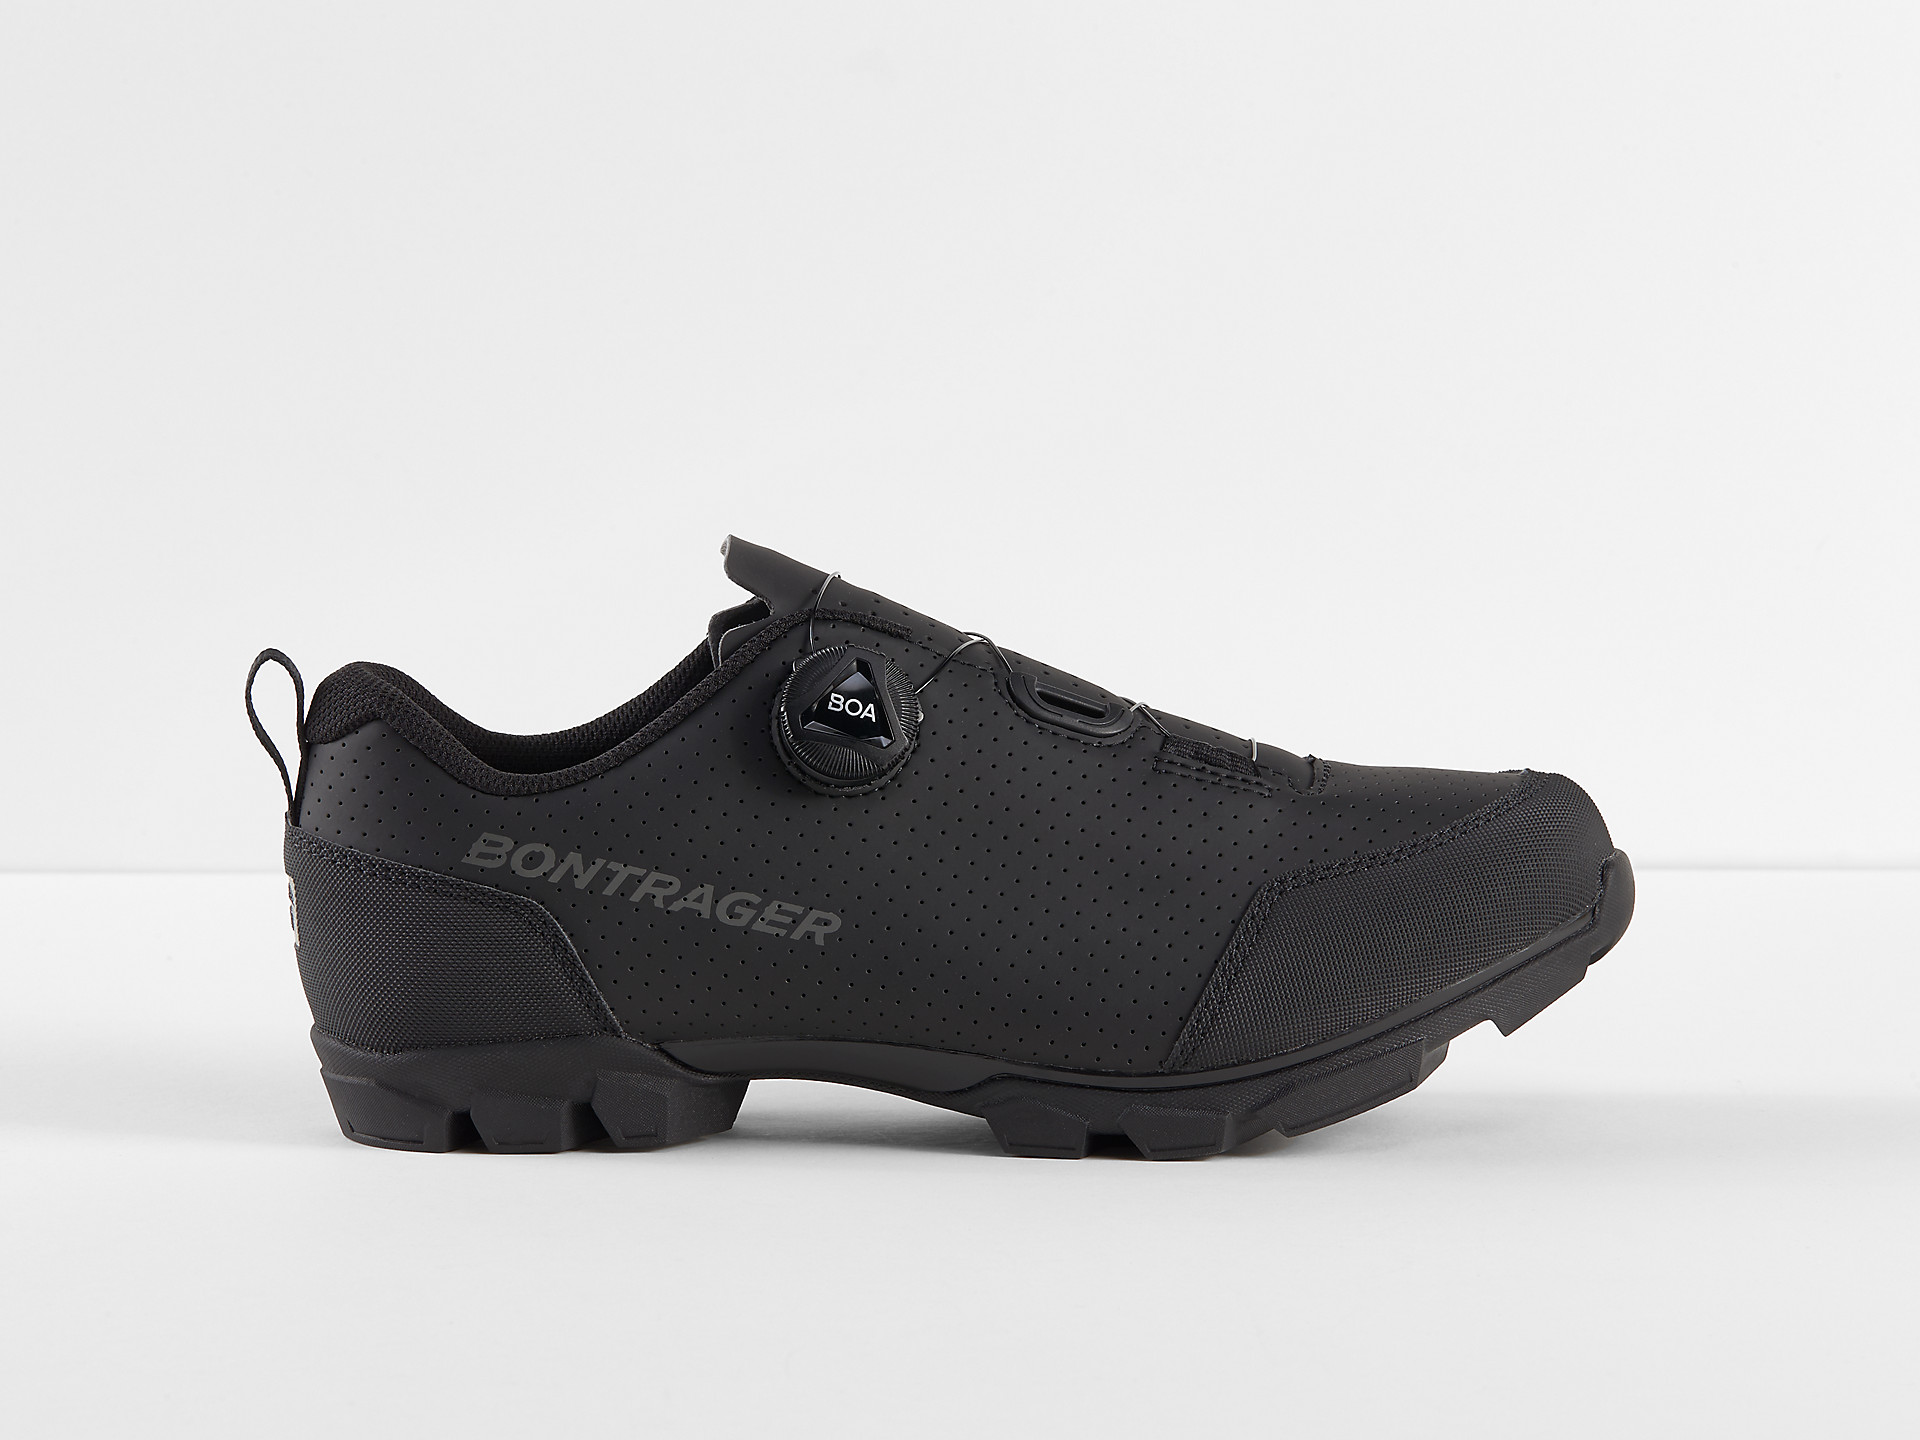 <a href="https://cycles-clement.be/product/chaussures-bont-evoke-46-black/">CHAUSSURES BONT EVOKE 46 BLACK</a>